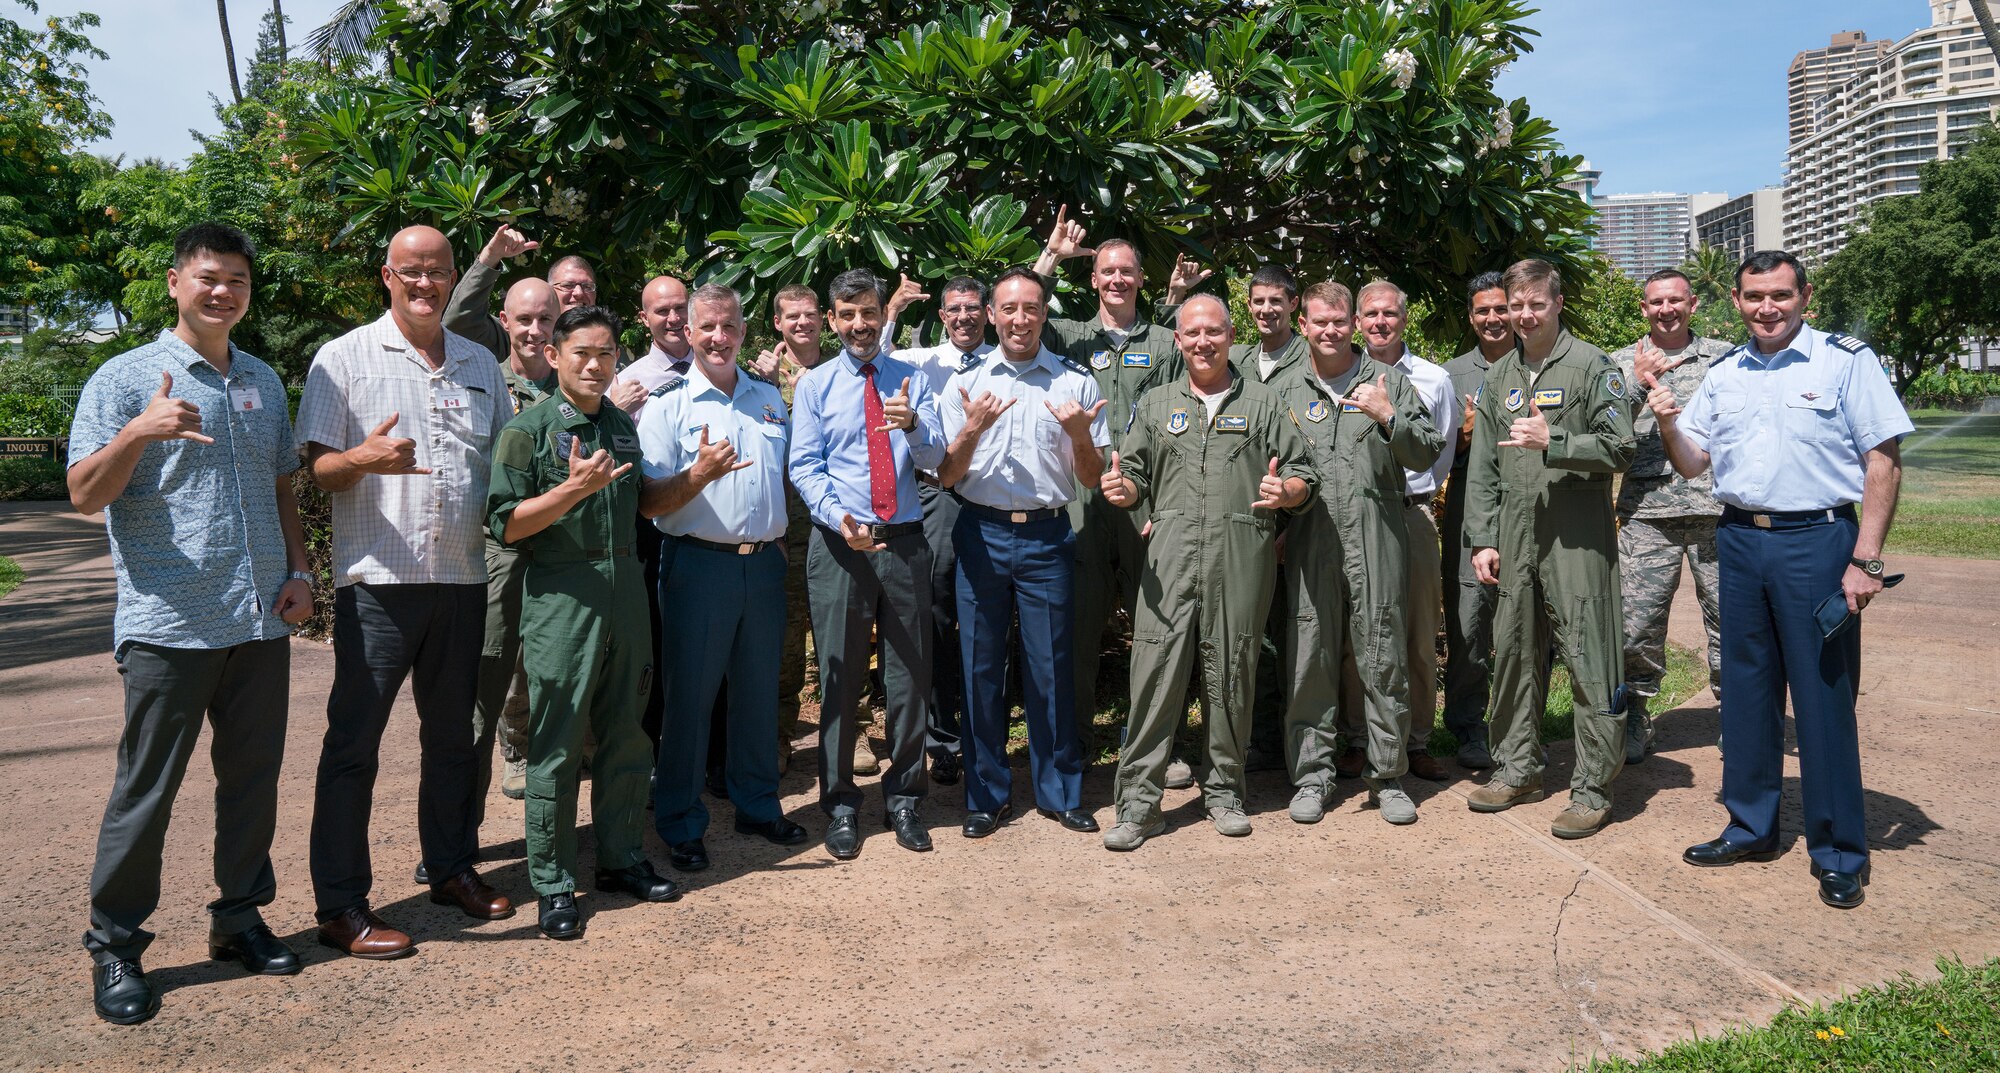 Attendees of the Asia-Pacific Aviation Safety Subject Matter Expert Exchange (APASS) pose for a photo together in Honolulu, Hawaii, Aug. 14, 2018. APASS allows partner nations in the Indo-Pacific to discuss aviation safety practices and devise solutions to challenges faced by the various air forces. (U.S. Air Force photo by Staff Sgt. Daniel Robles)